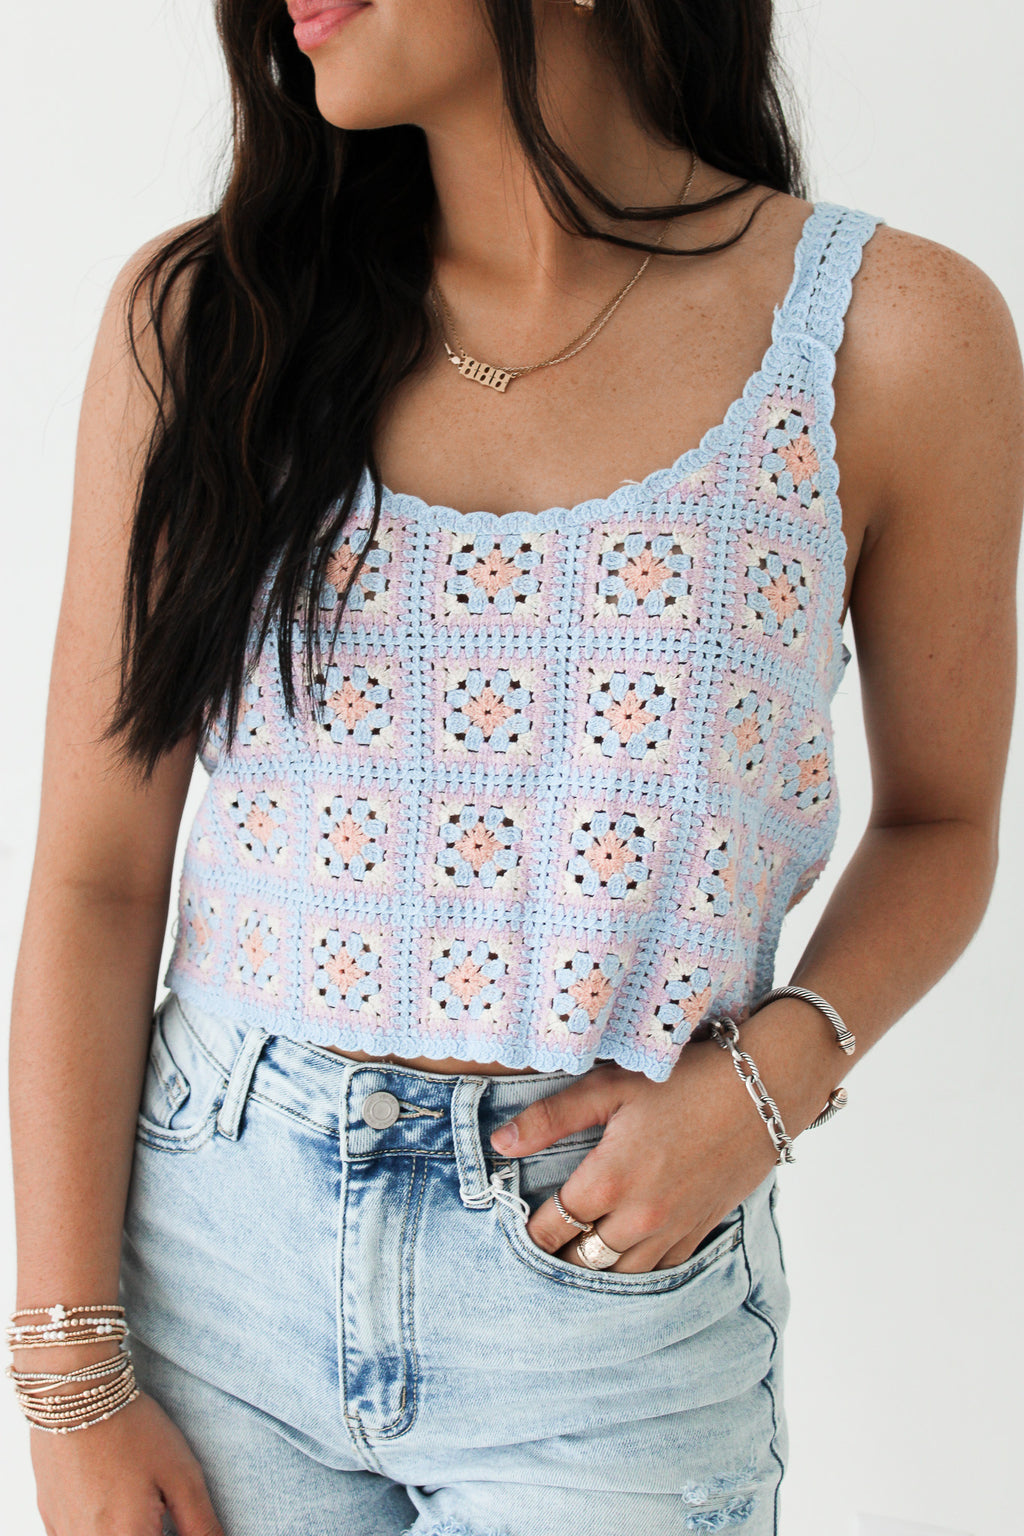 BLOOM WITH GRACE FLORAL CROCHET TOP | SKY